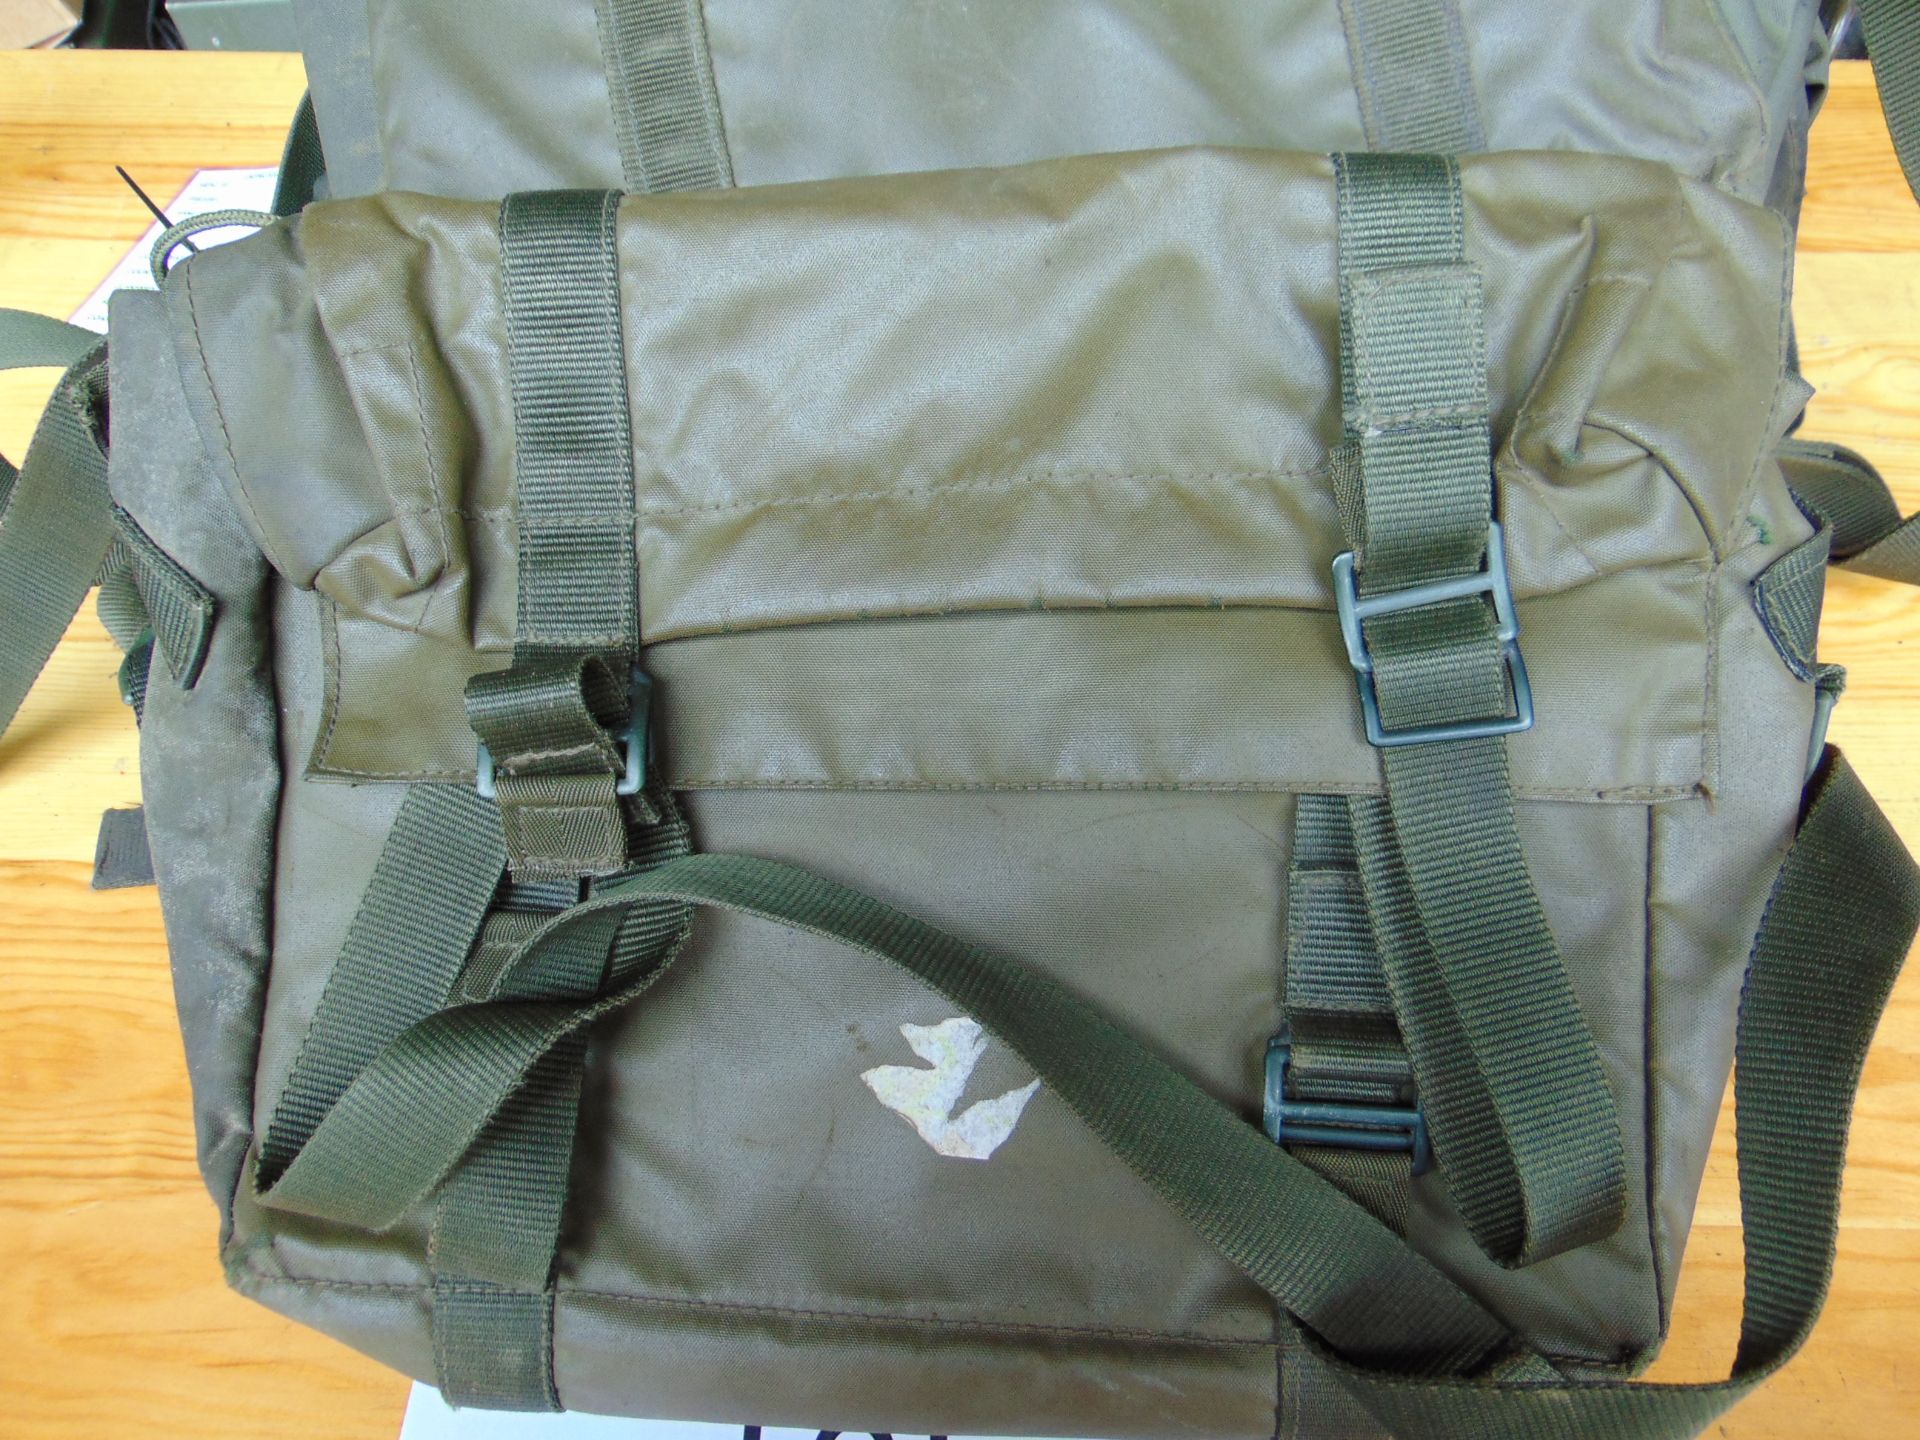 6x Clansman Radio Accessory Bags - No Contents - Image 2 of 4